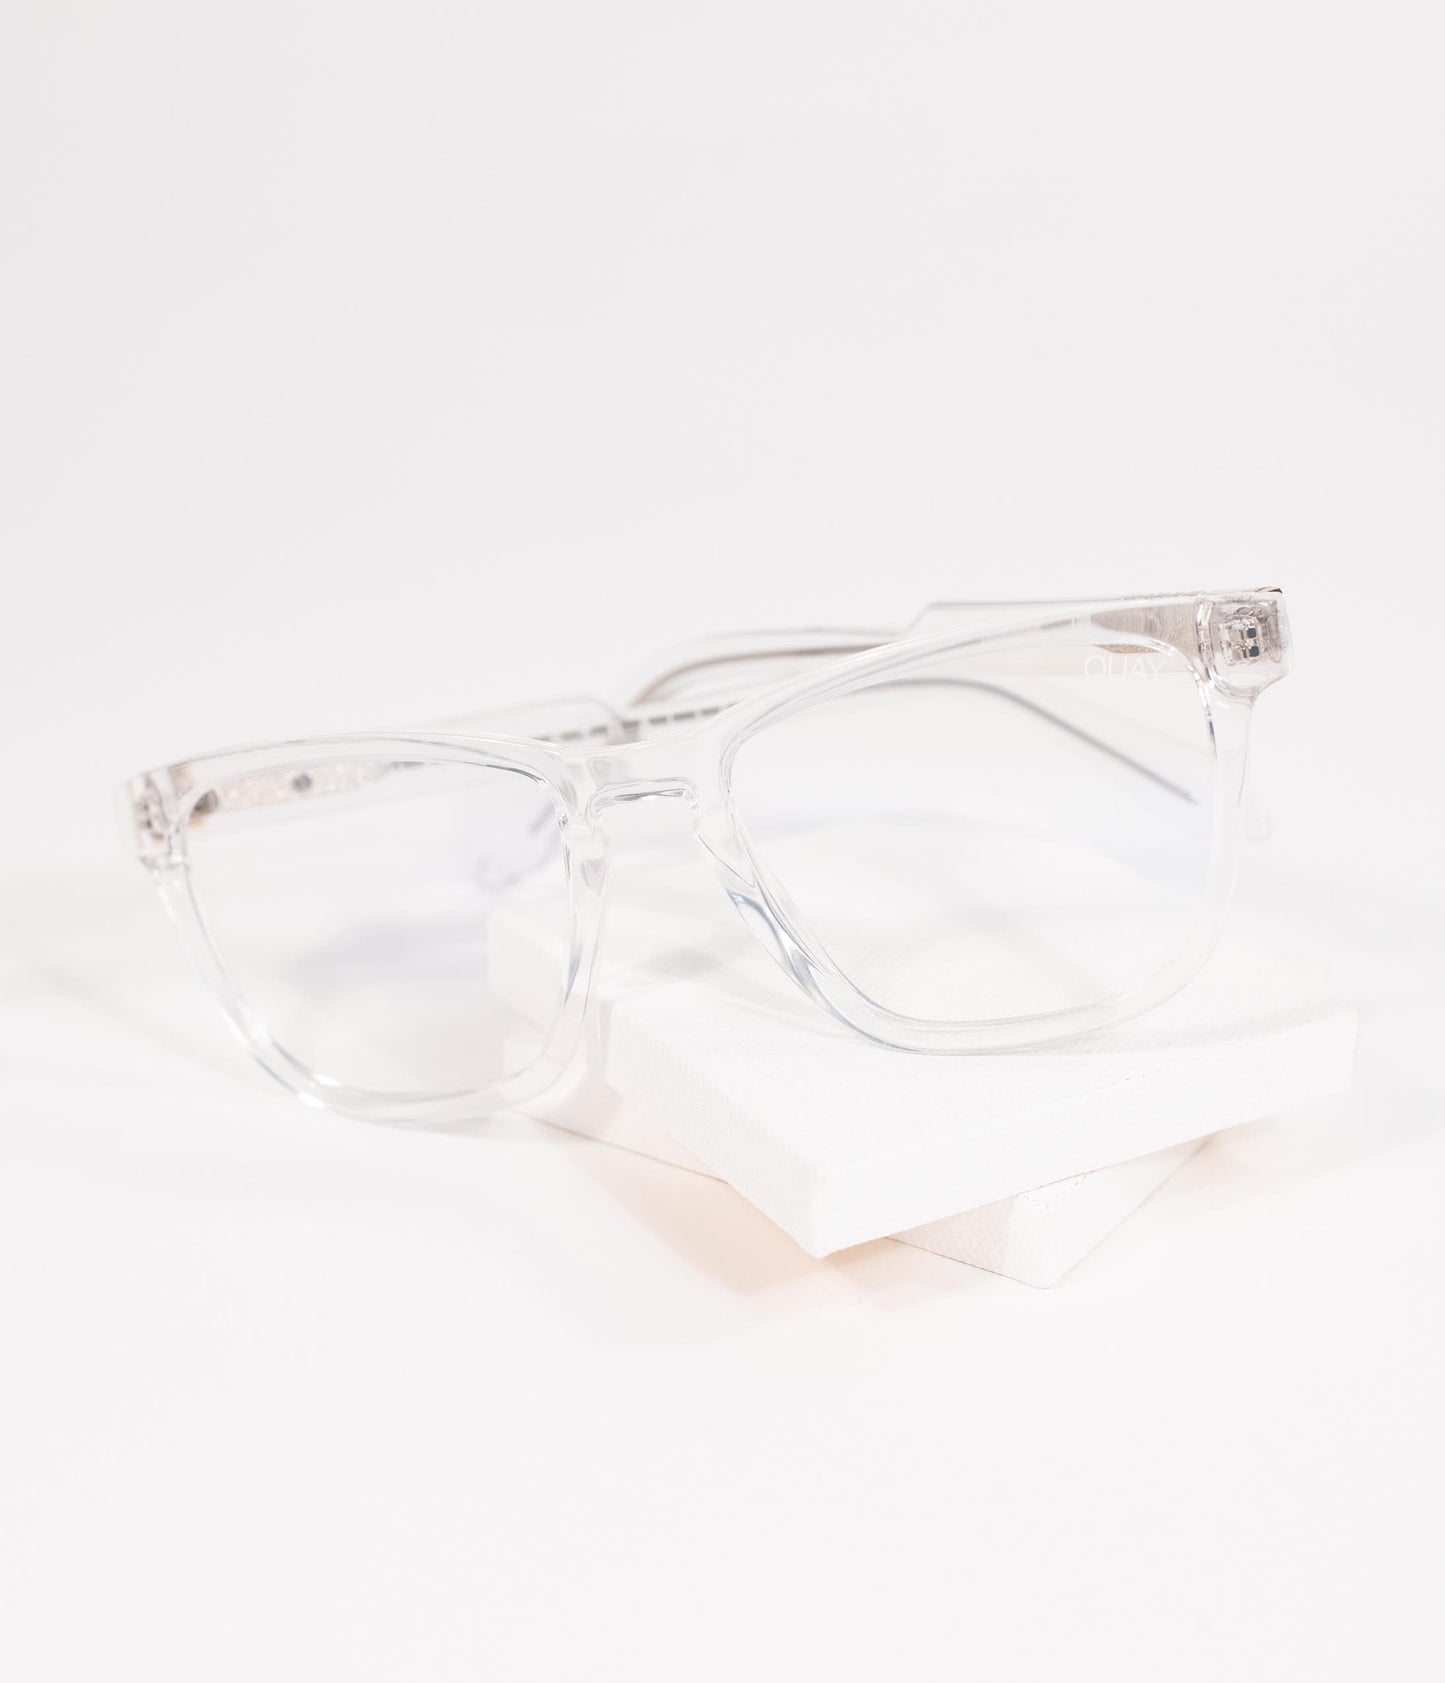 Quay Clear Hardwire Blue Light Square Glasses